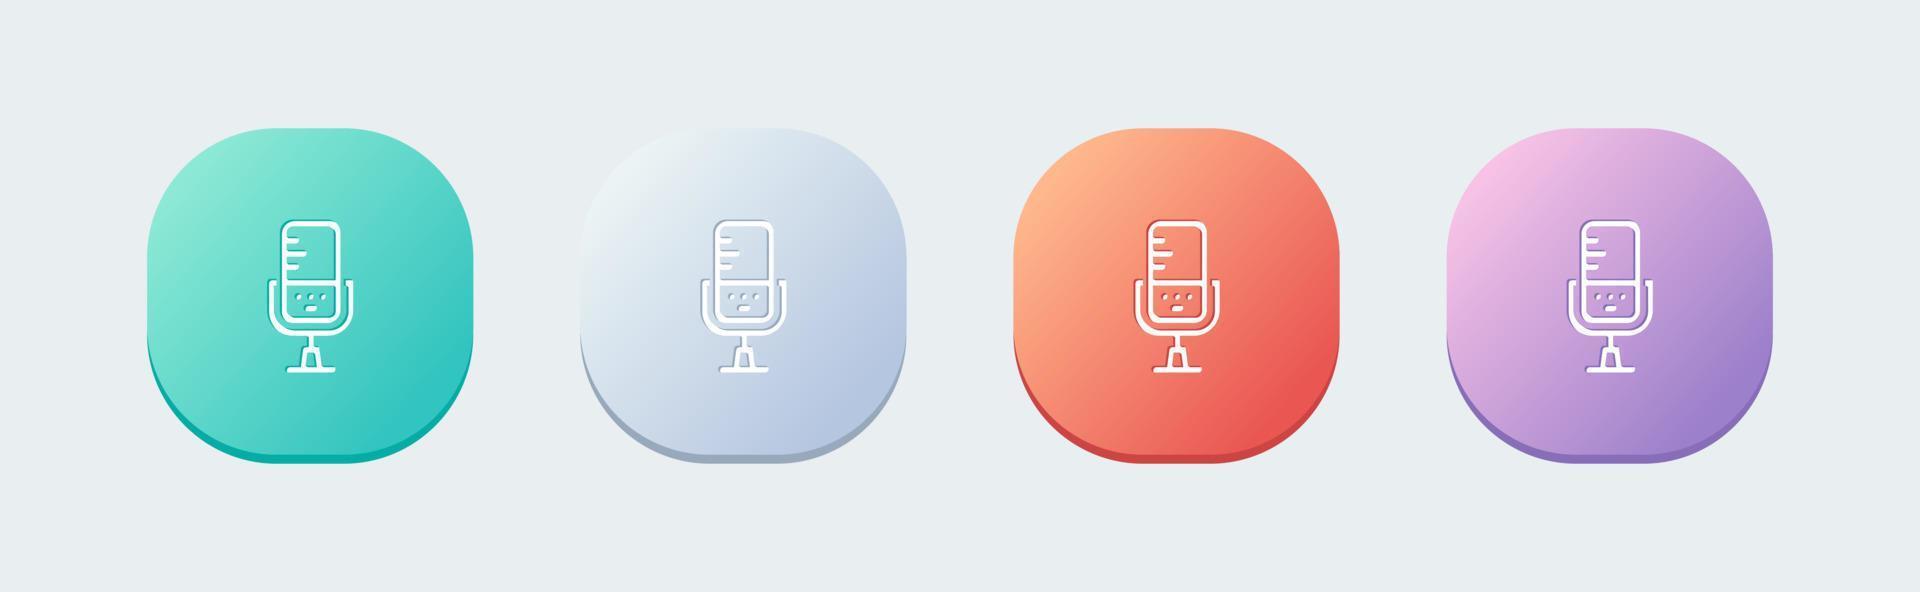 Microphone line icon in flat design style. Podcast signs vector illustration